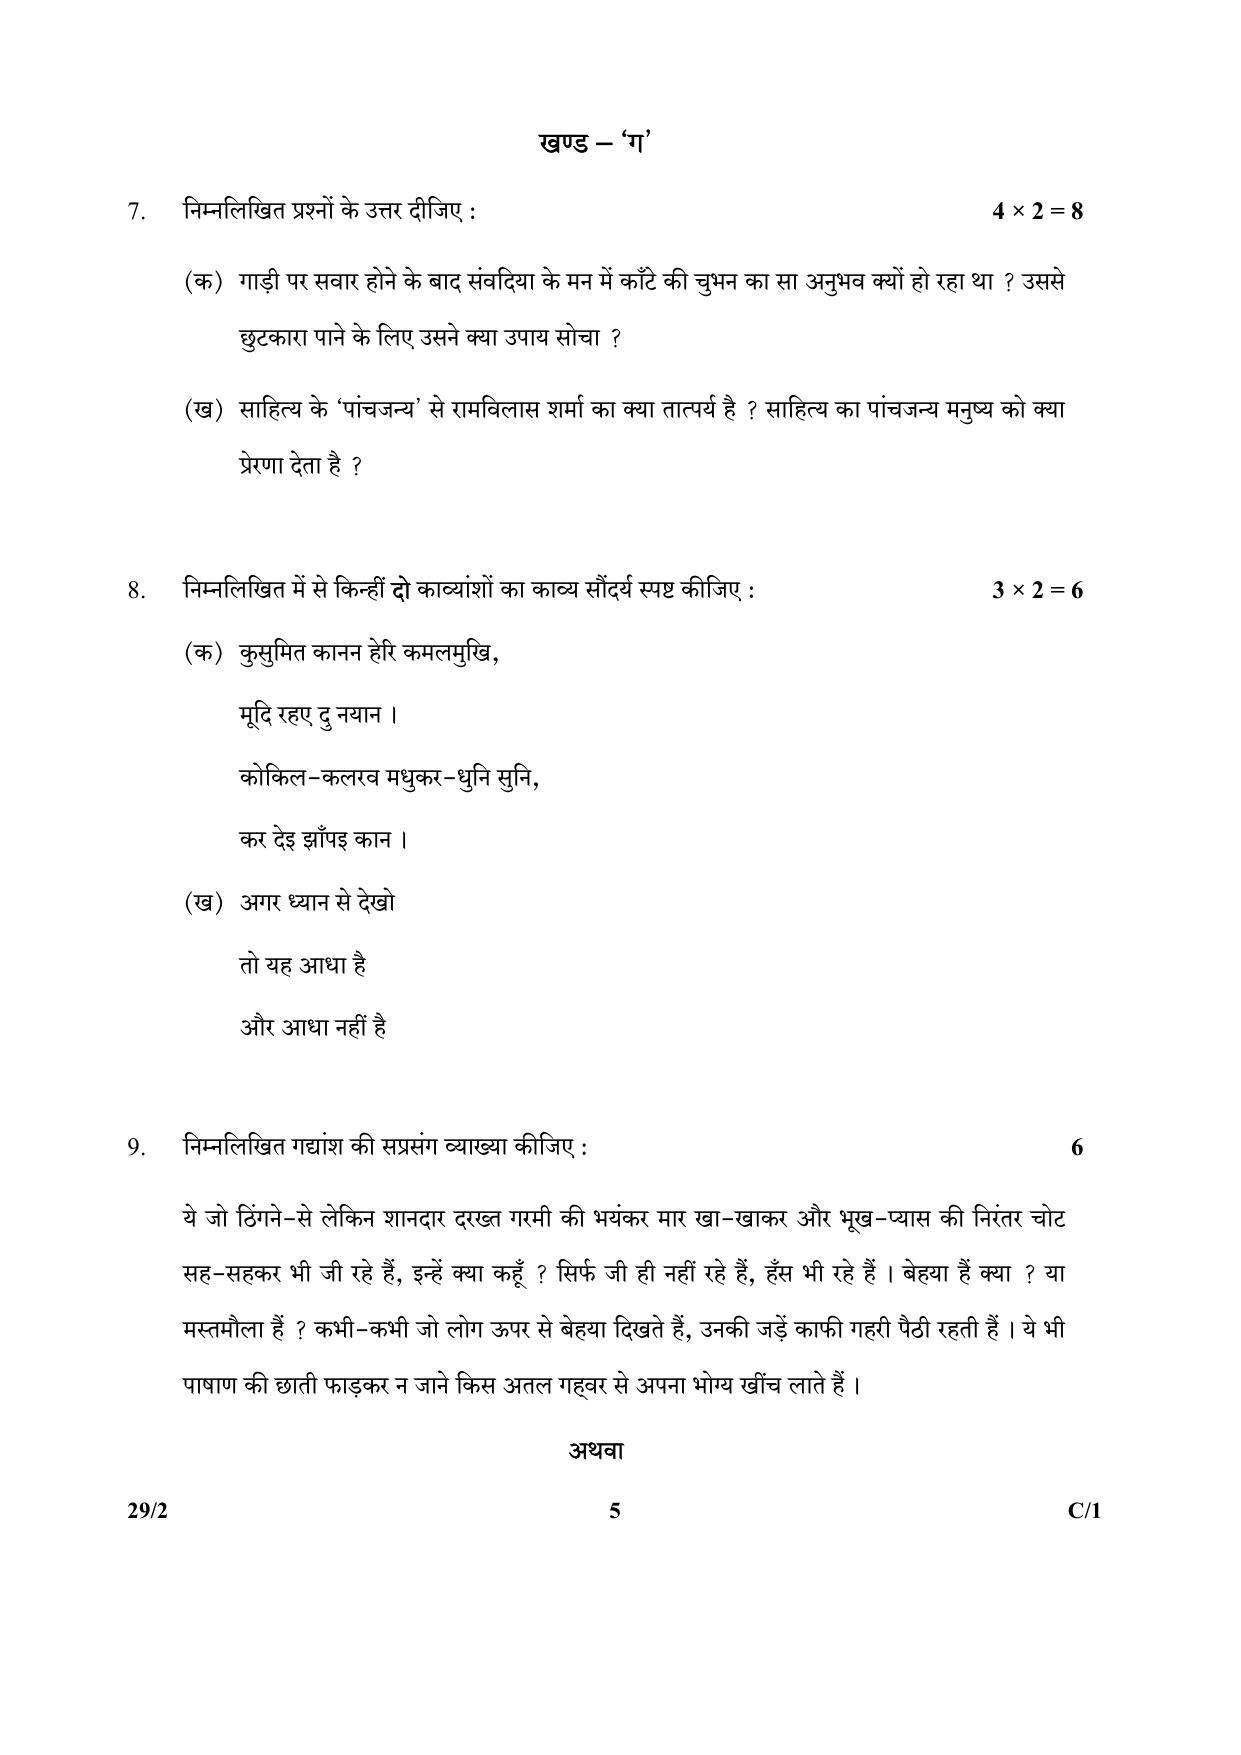 CBSE Class 12 29-2 (Hindi Elective) 2018 Compartment Question Paper - Page 5